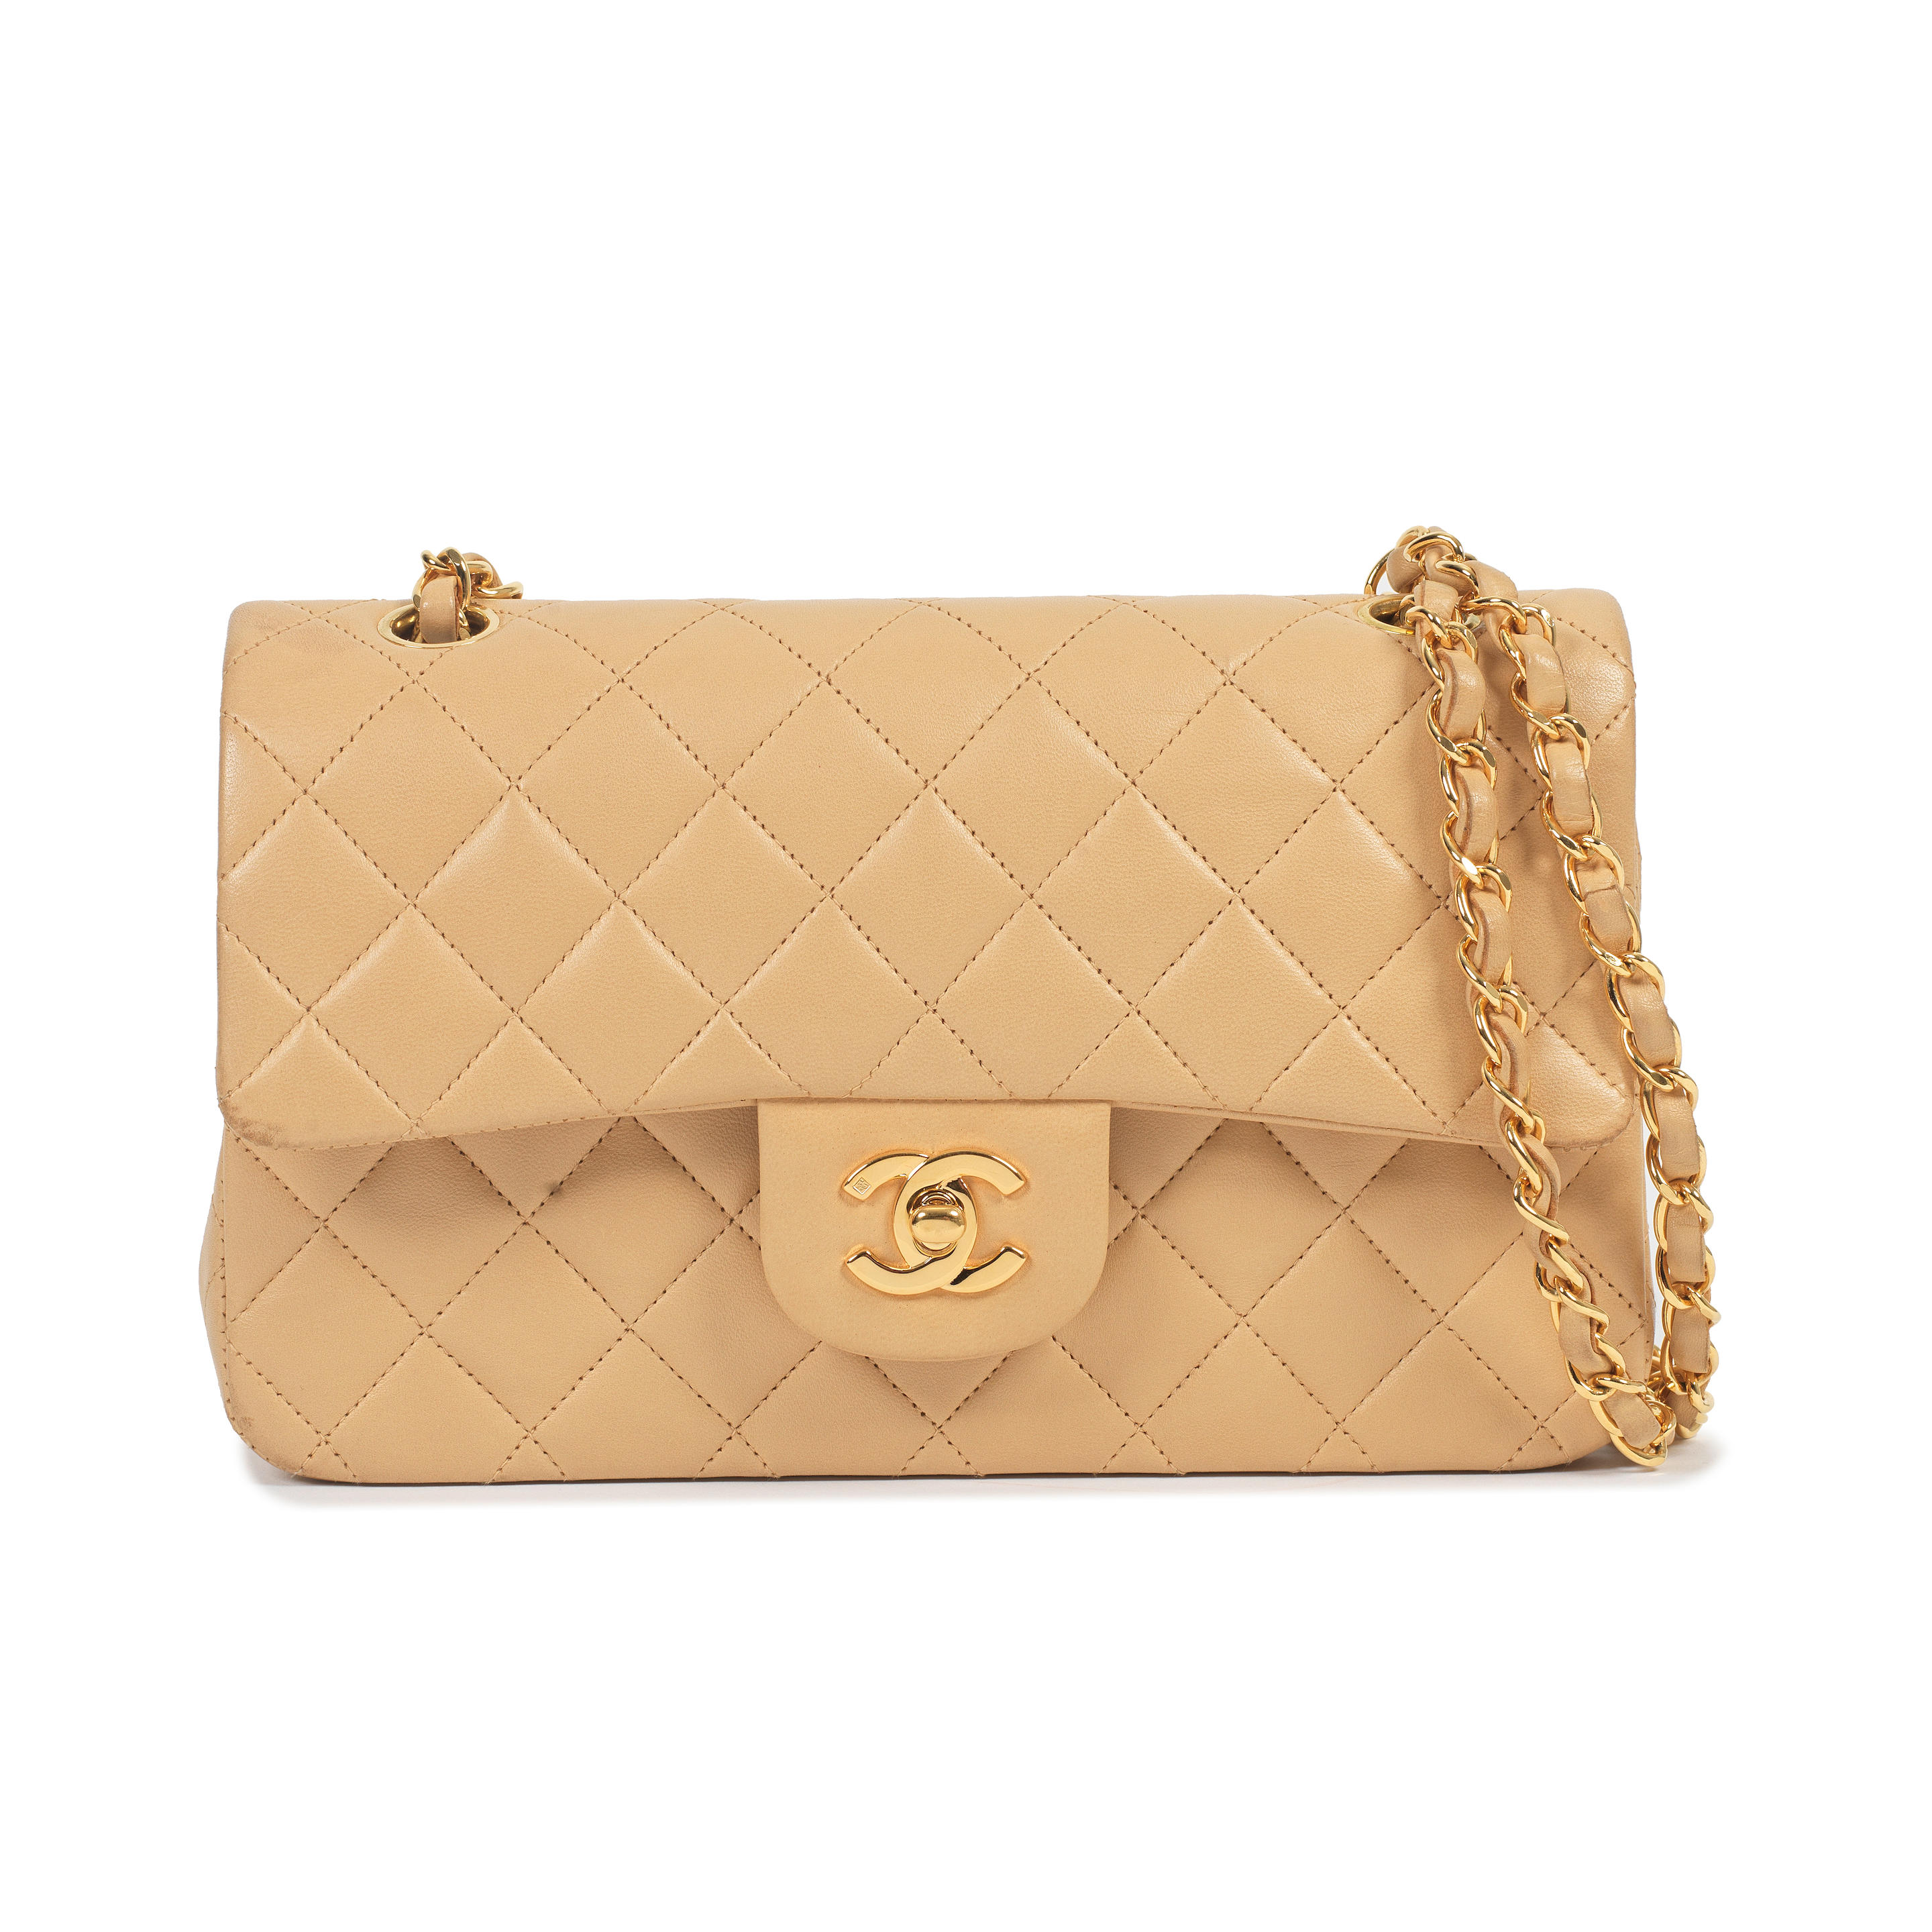 Bonhams : Karl Lagerfeld for Chanel a Beige Lambskin Small Classic Double  Flap Bag 1996-97 (includes serial sticker, authenticity card, care booklet,  felt protector, dust bag and box)